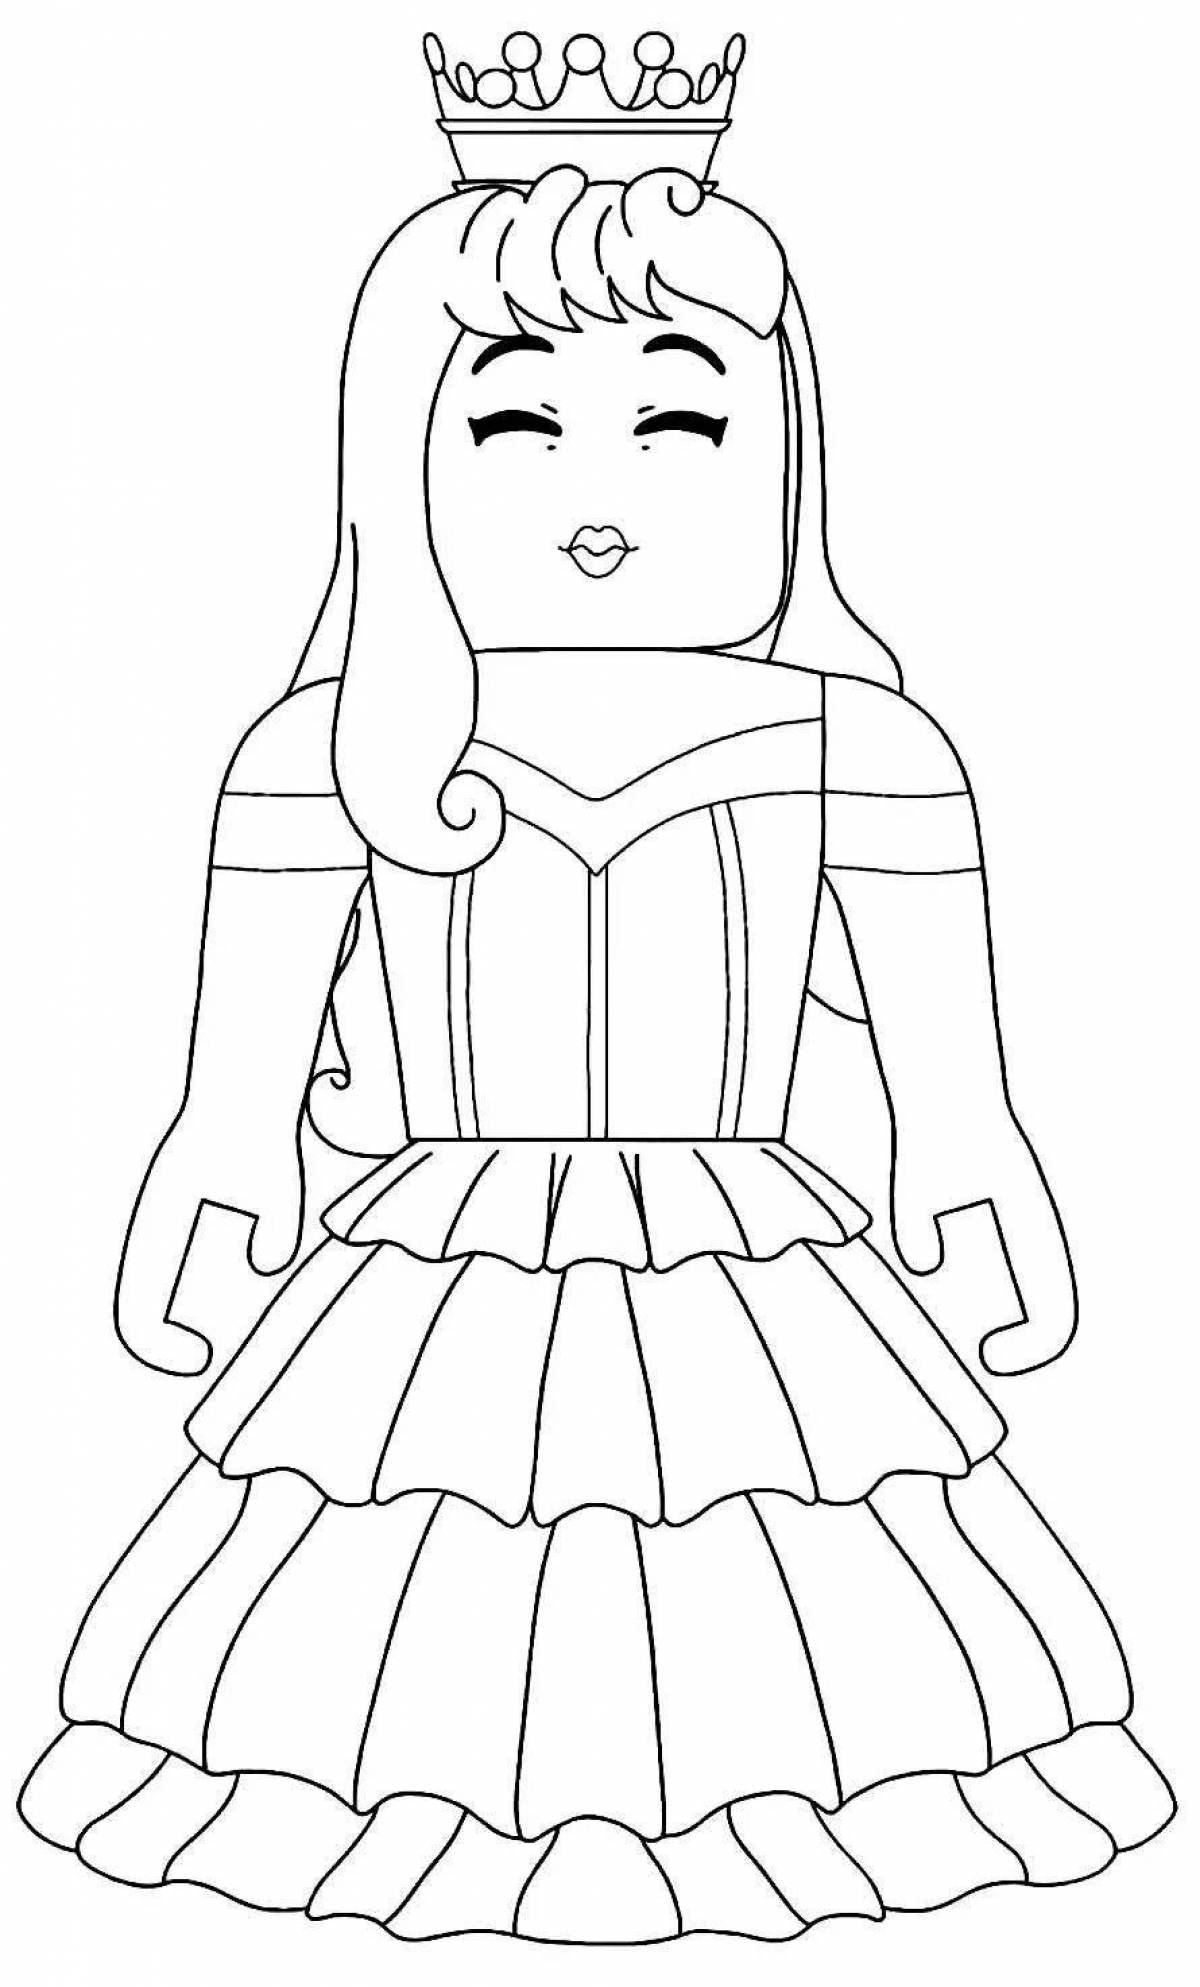 Funny skins roblox girls coloring page